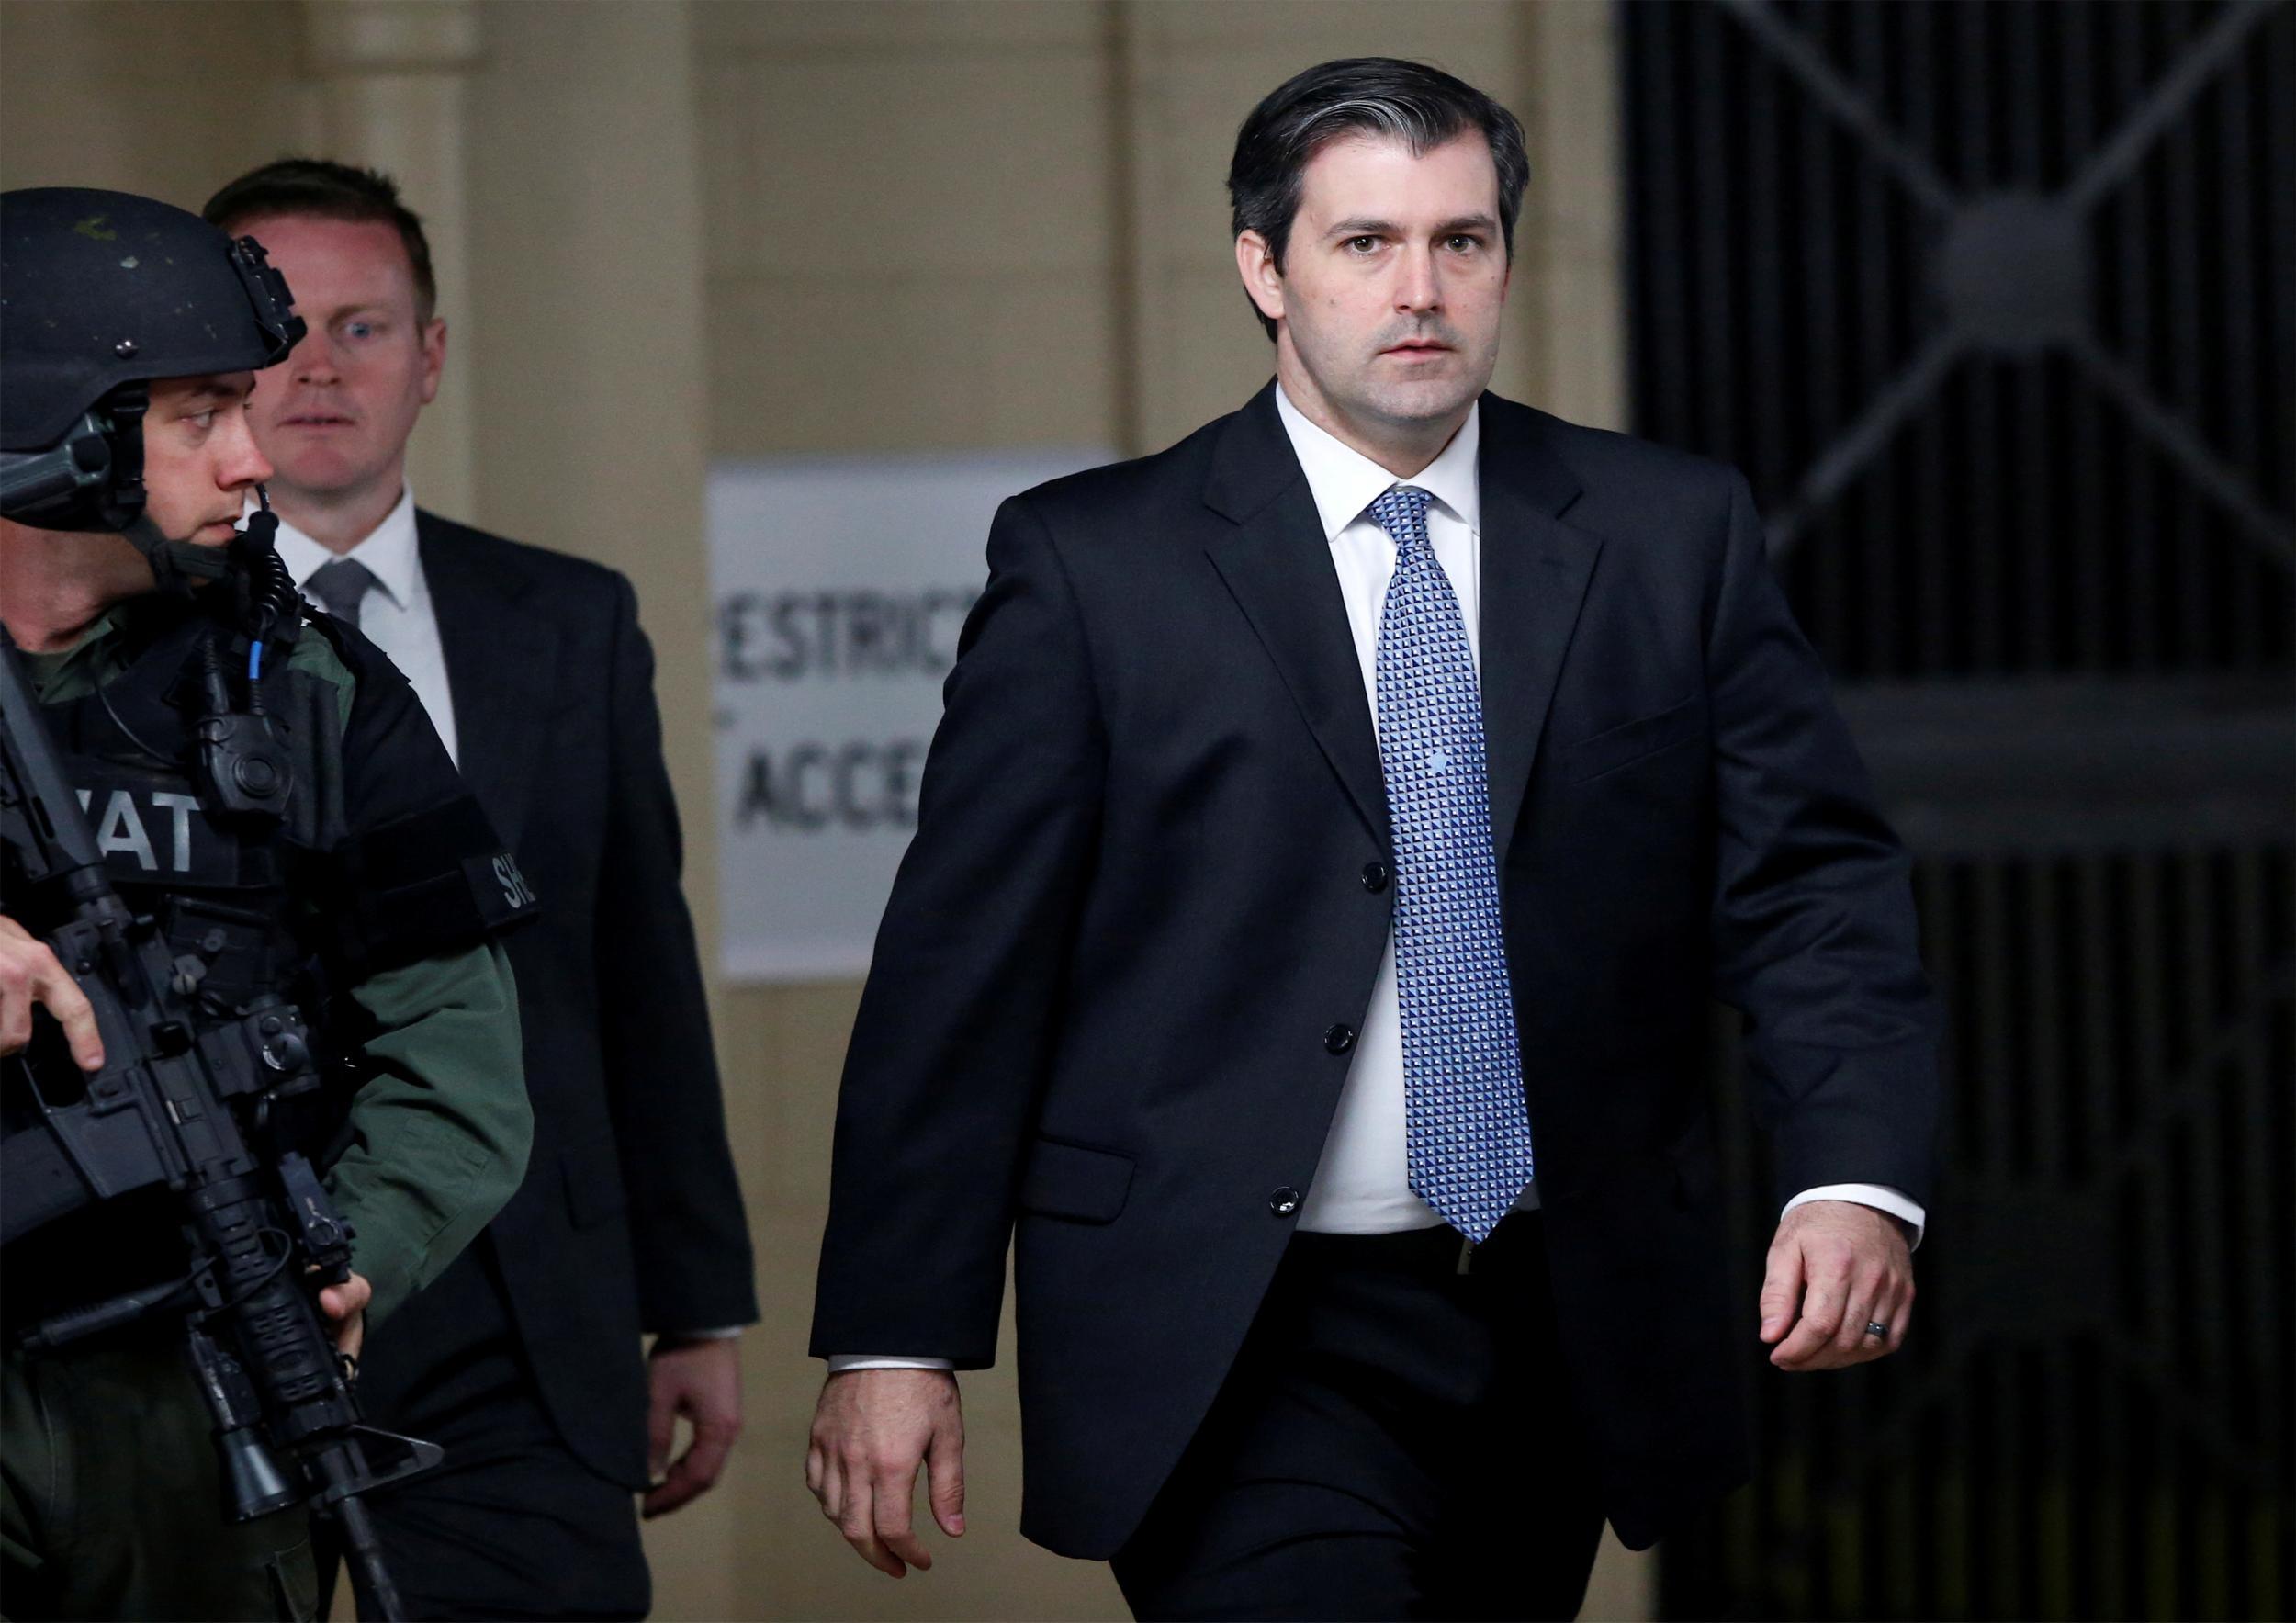 Slager has been in prison since pleading guilty in May